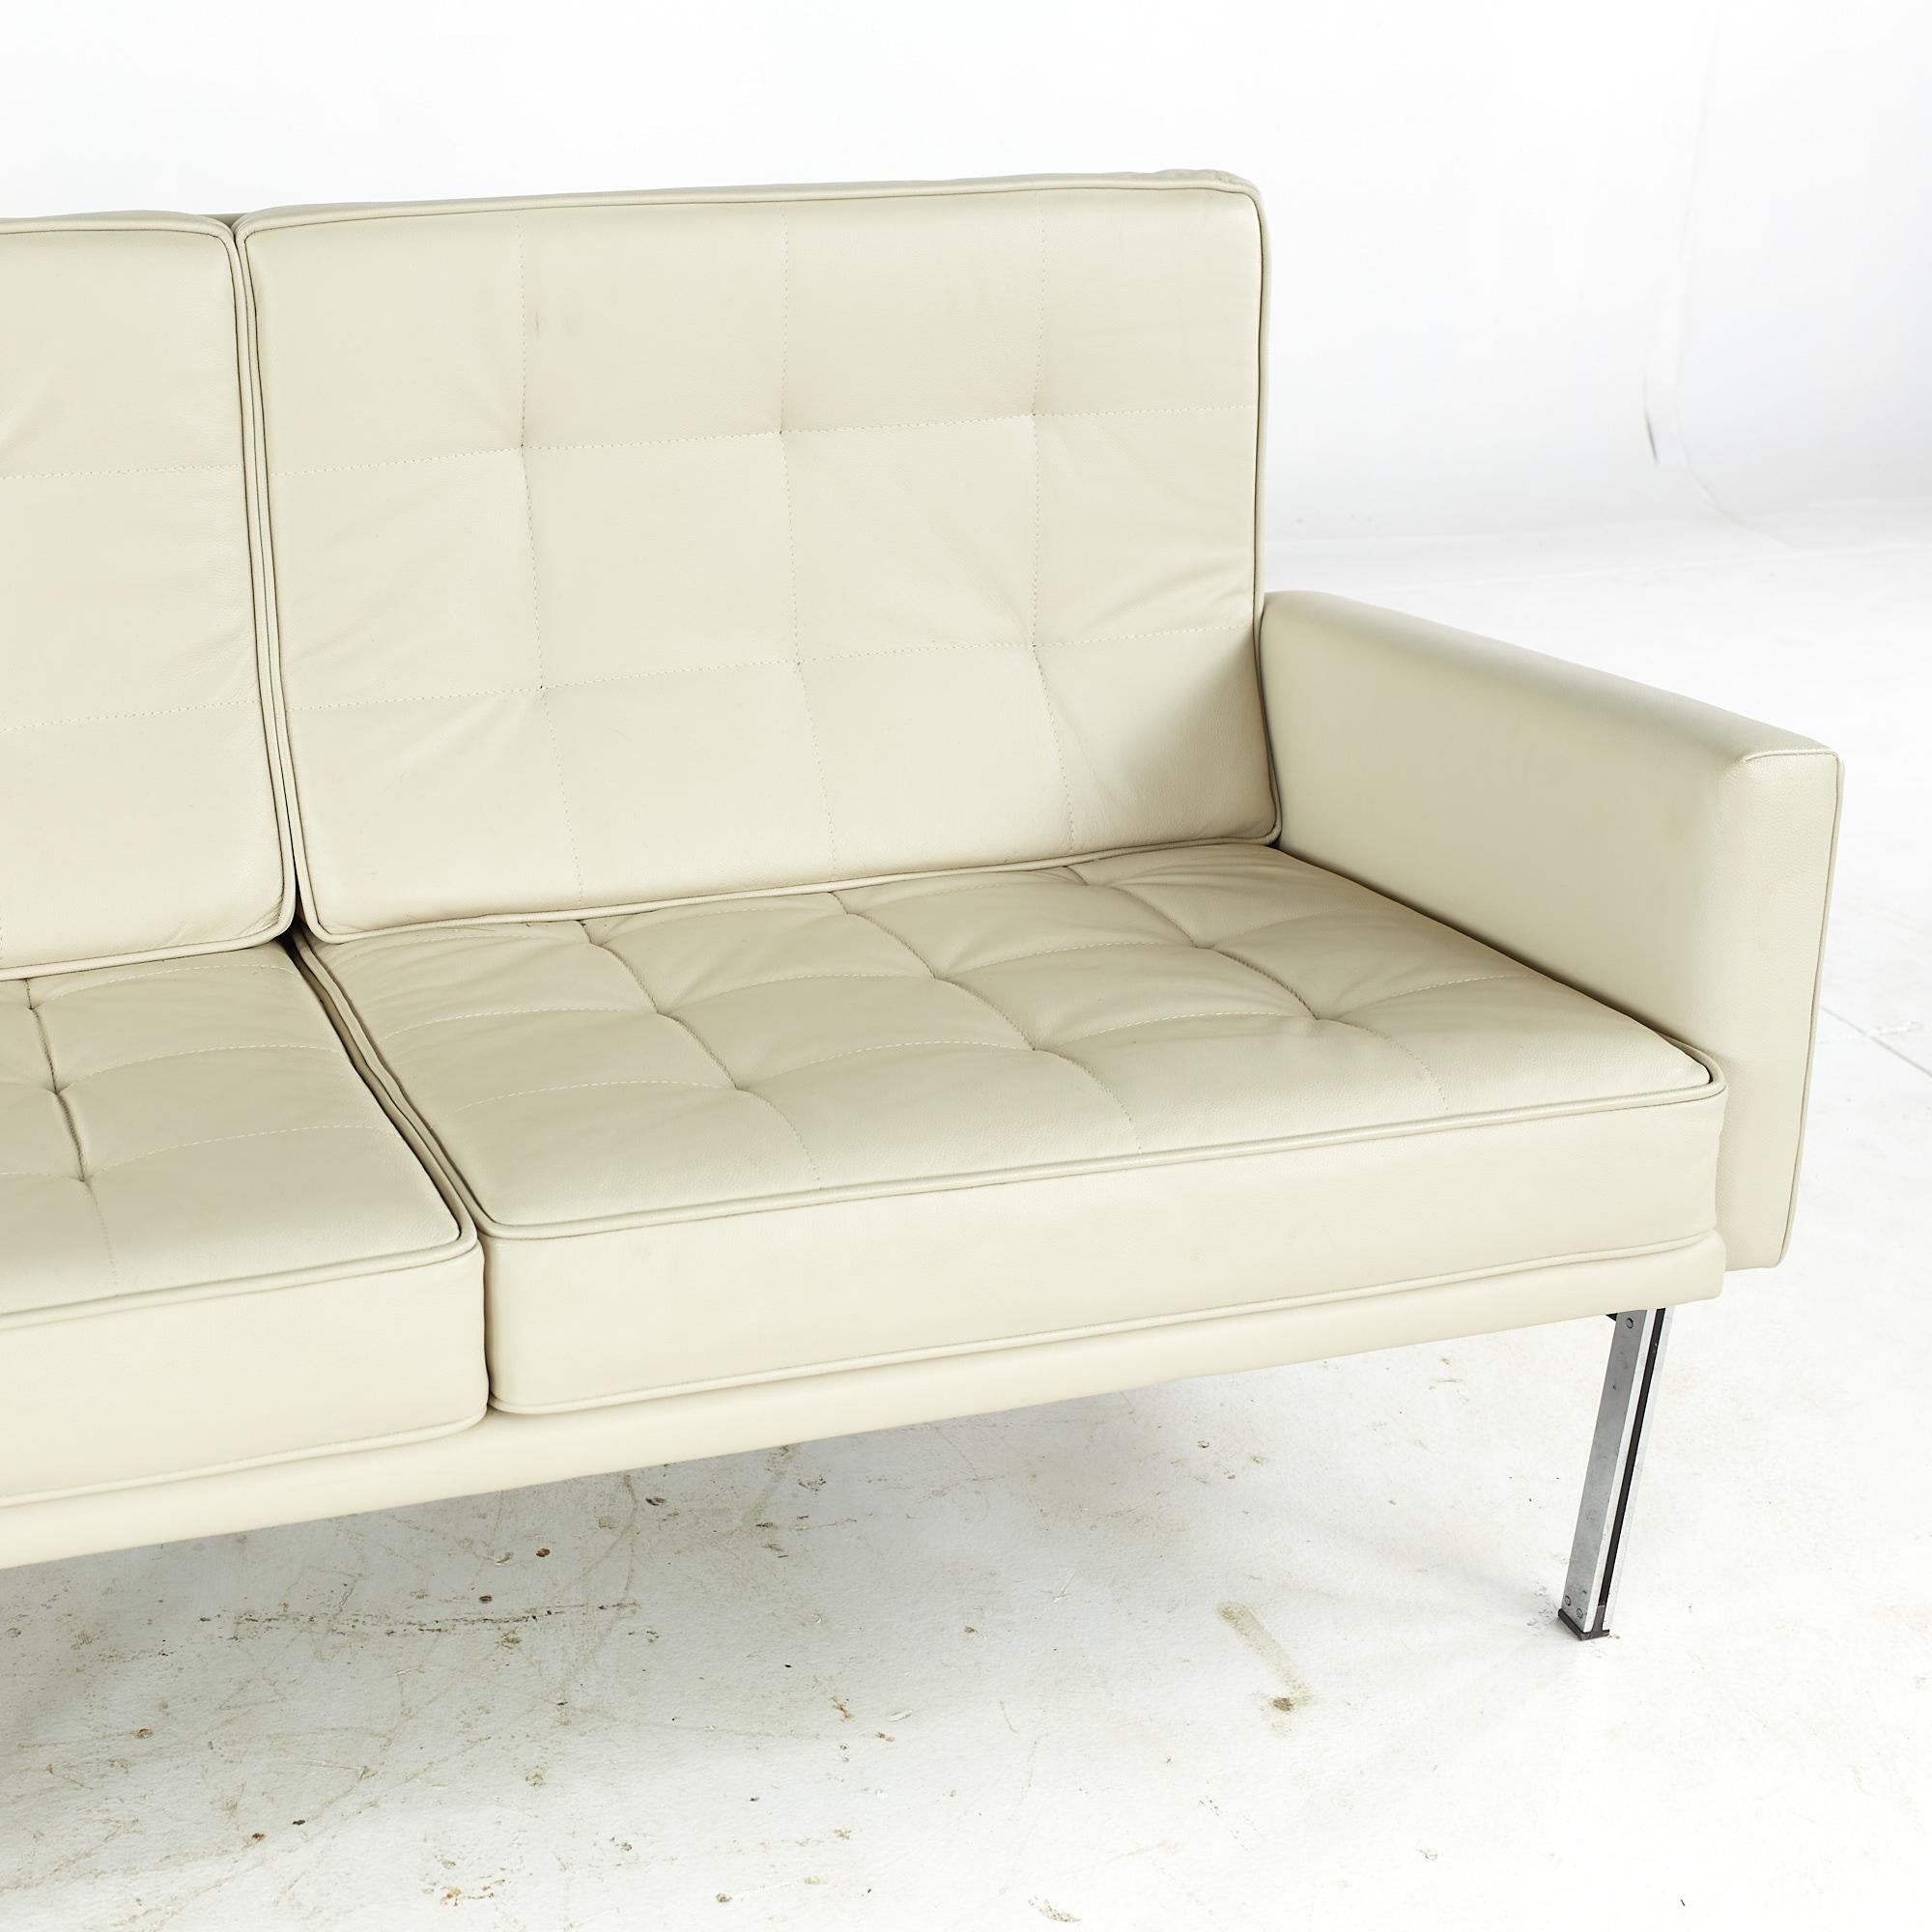 Late 20th Century Knoll Mid Century Chrome and Leather Parallel Bar Sofa For Sale